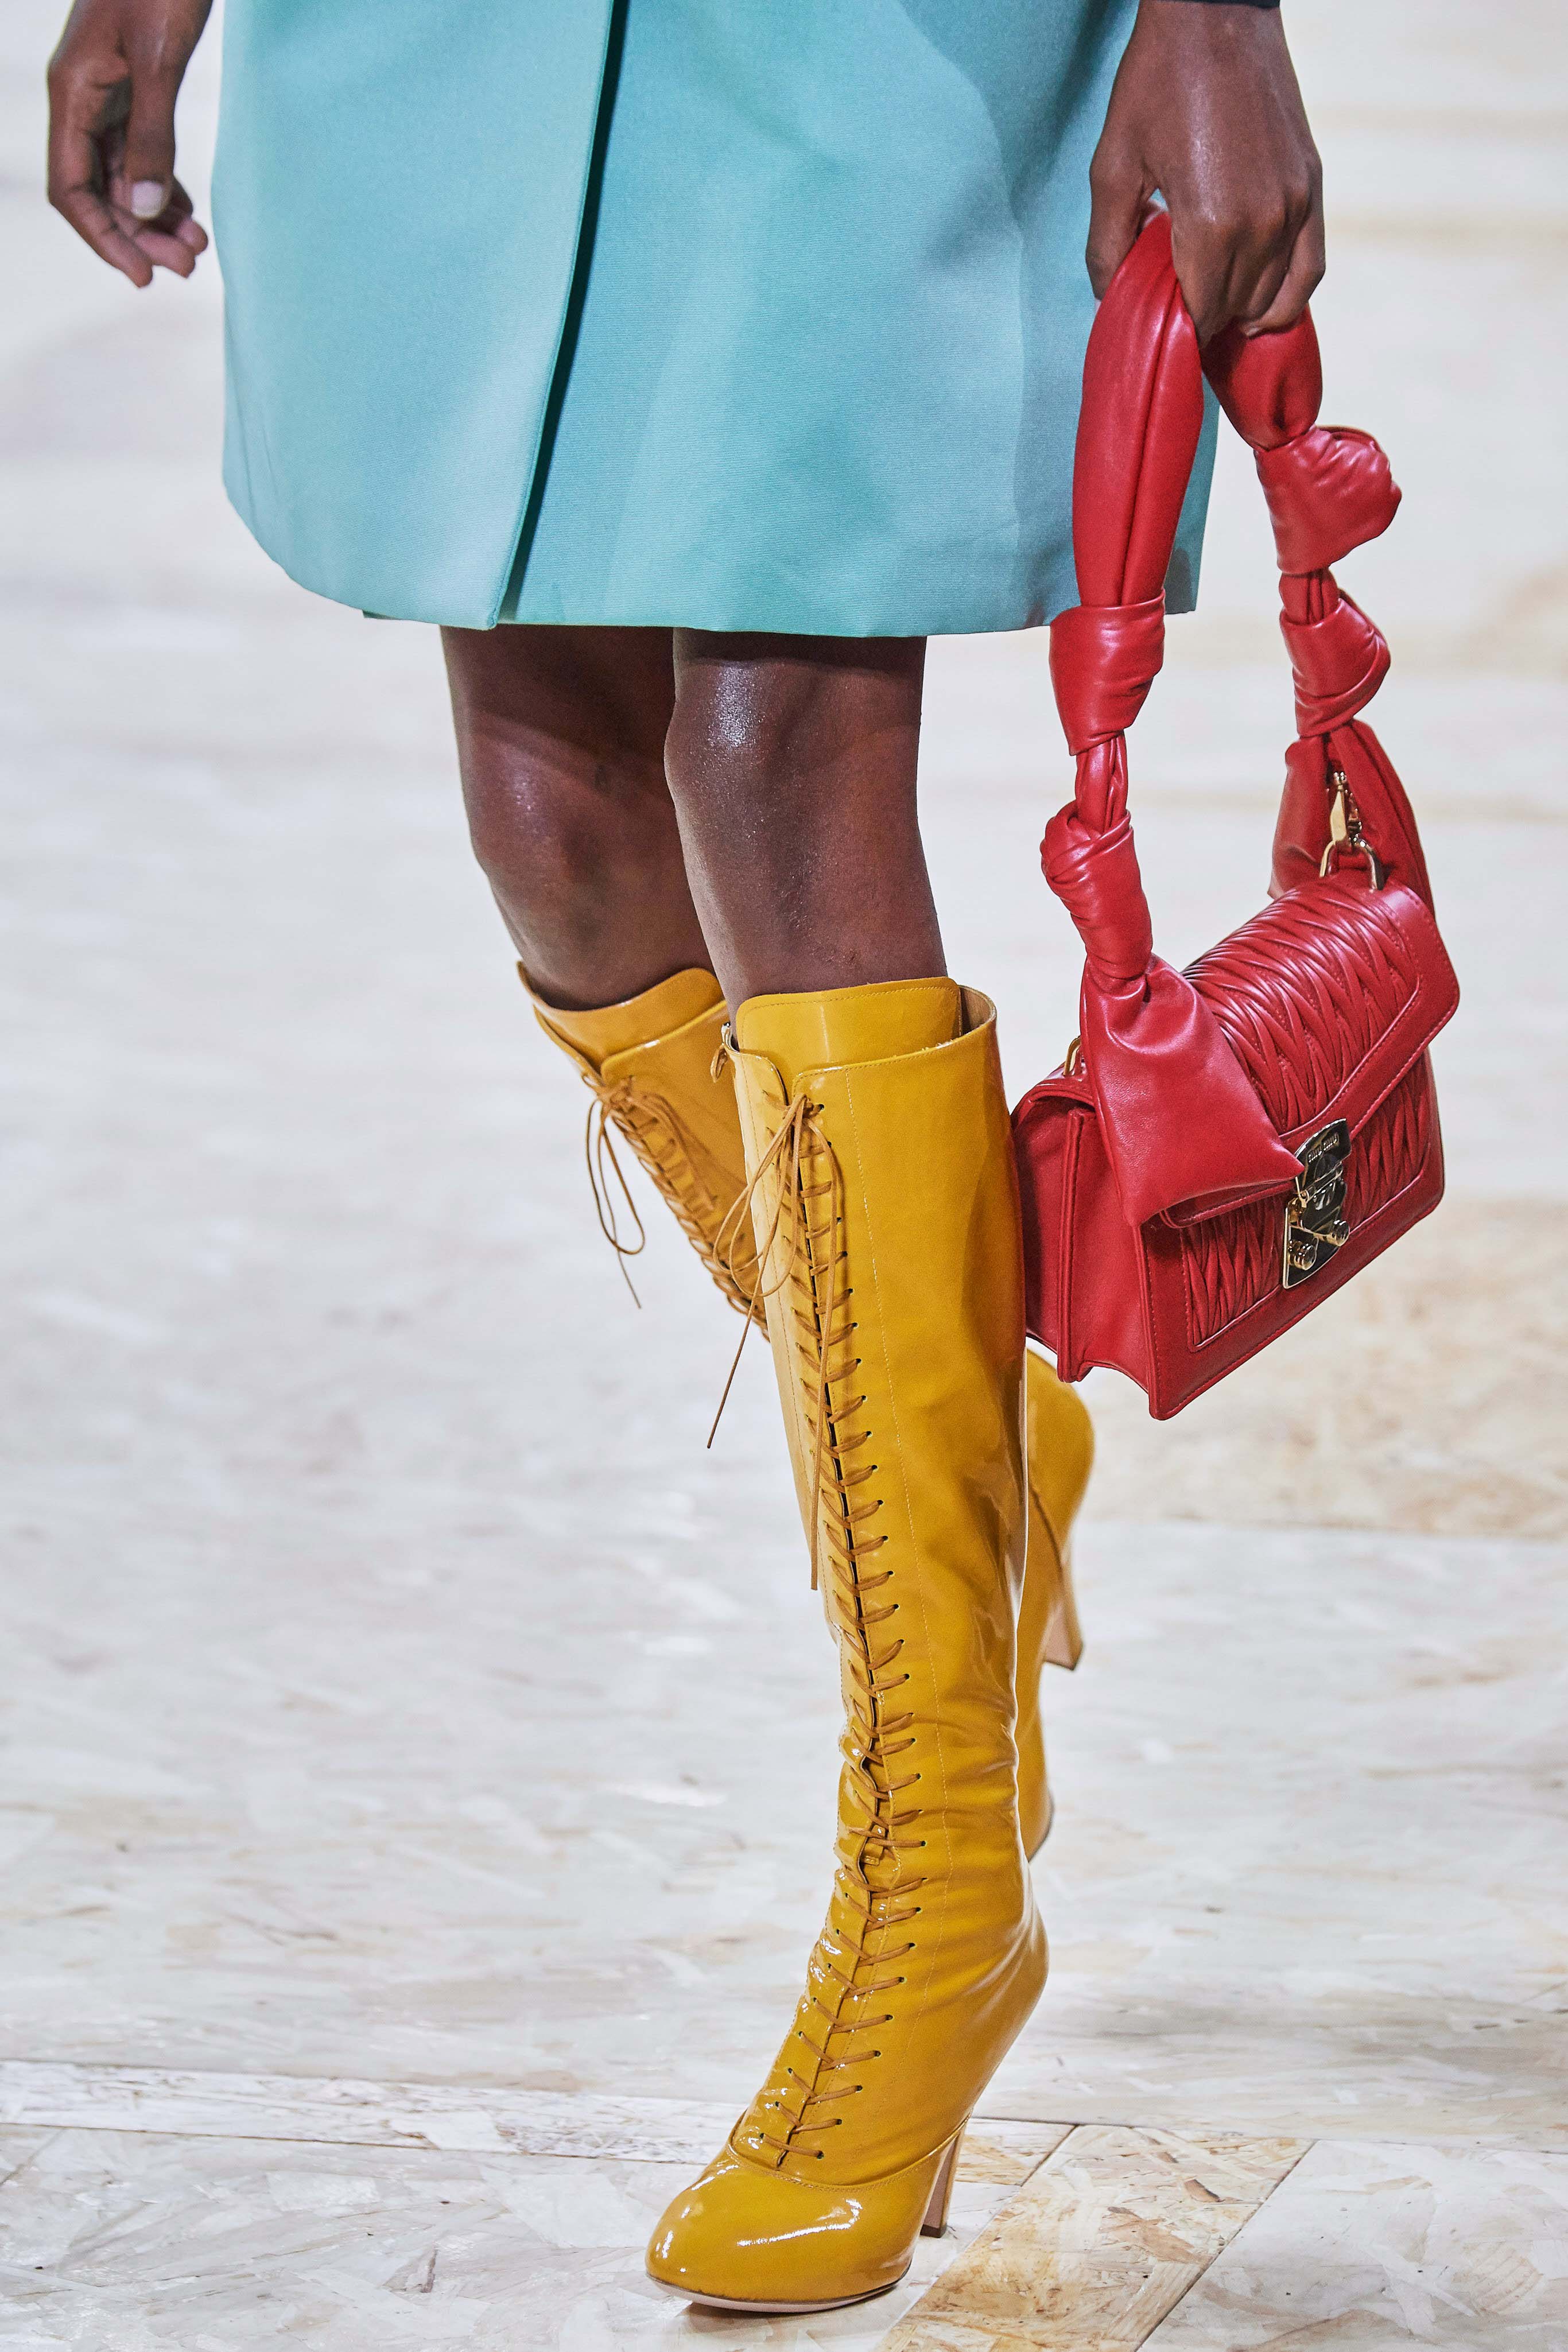 MiuMiu Spring Summer 2020 SS2020 trends runway coverage Ready To Wear Vogue Details shoes